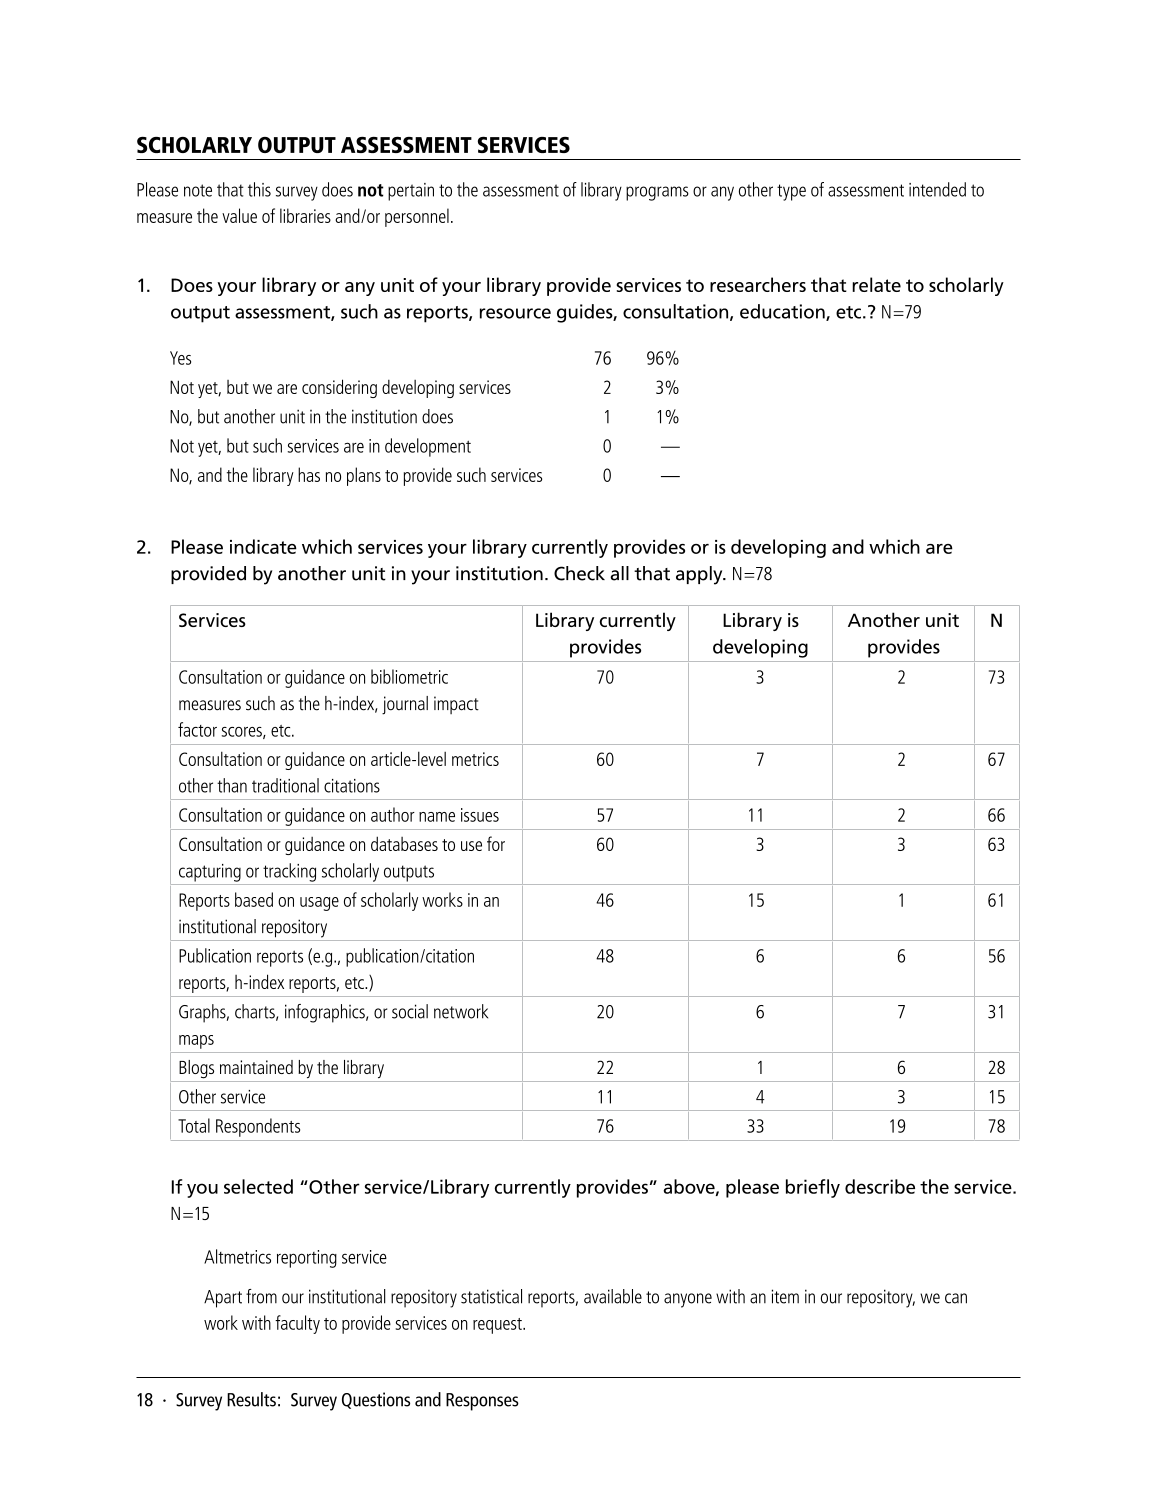 SPEC Kit 346: Scholarly Output Assessment Activities (May 2015) page 18